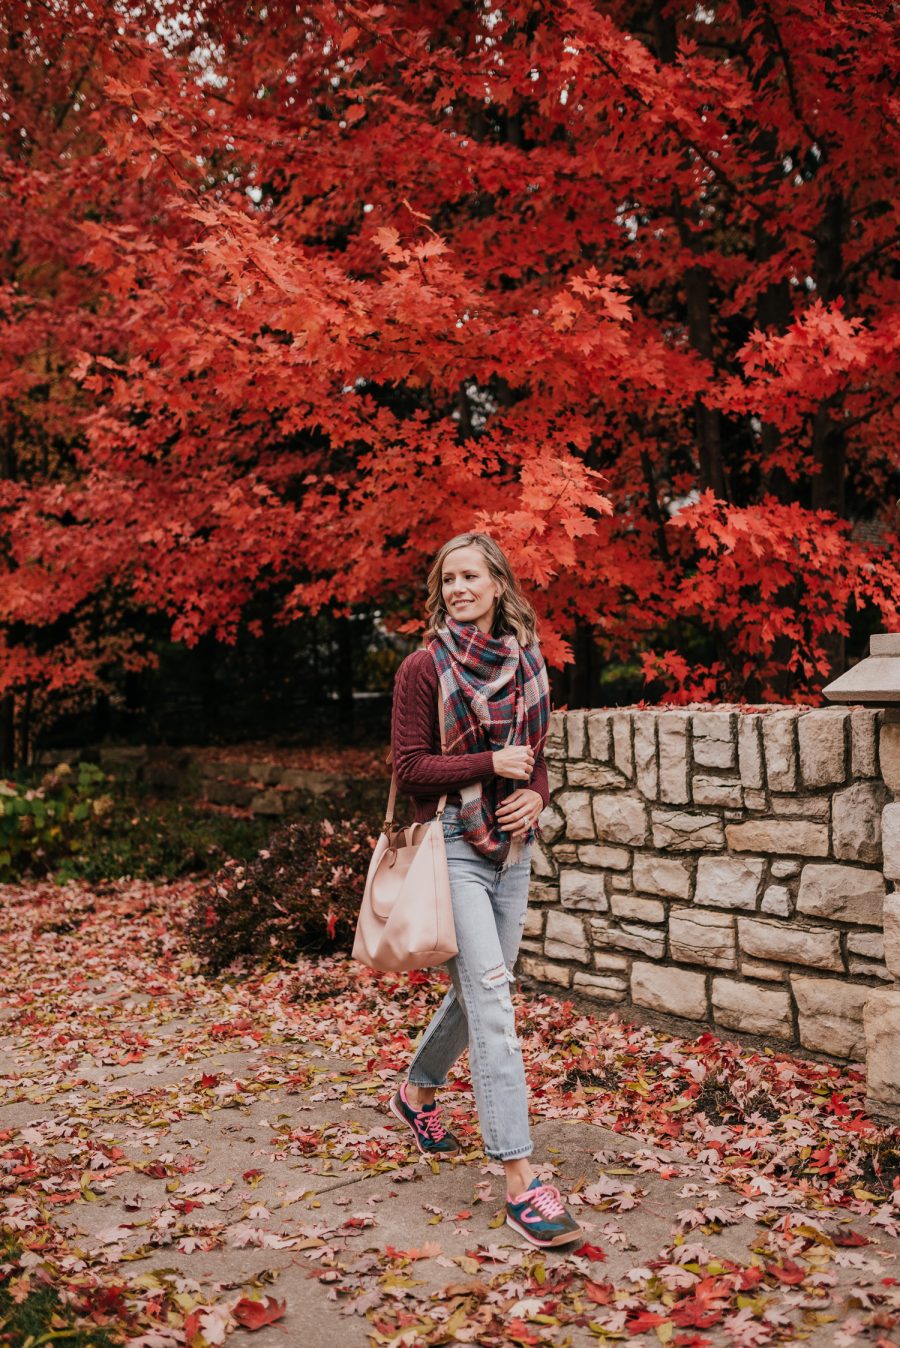 Thanksgiving Outfit Idea, cable knit sweater, plaid scarf, denim, sneakers, and tote bag